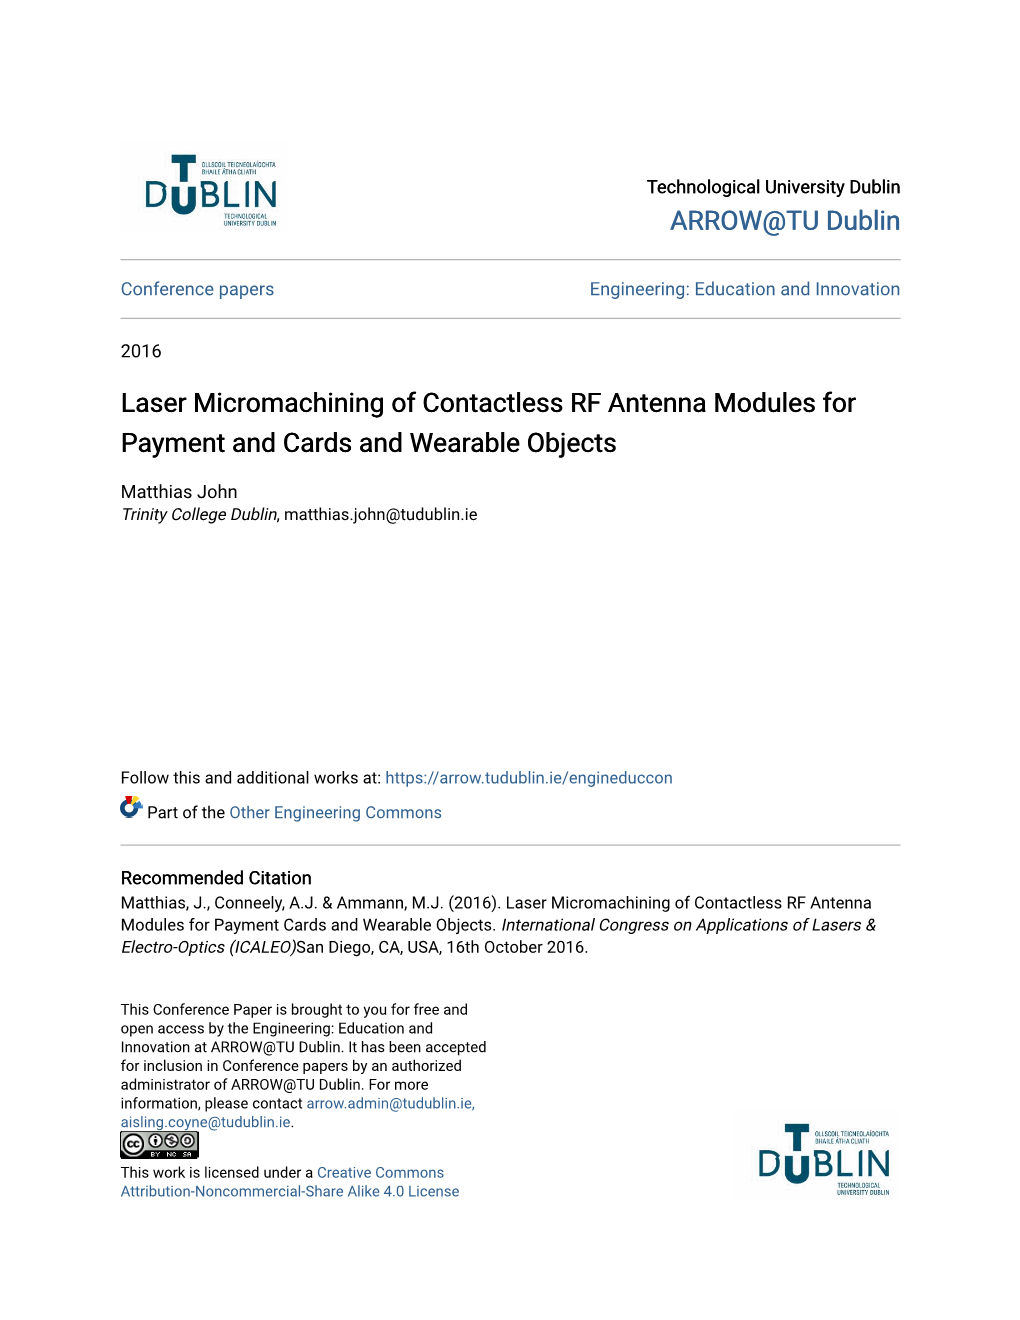 Laser Micromachining of Contactless RF Antenna Modules for Payment and Cards and Wearable Objects